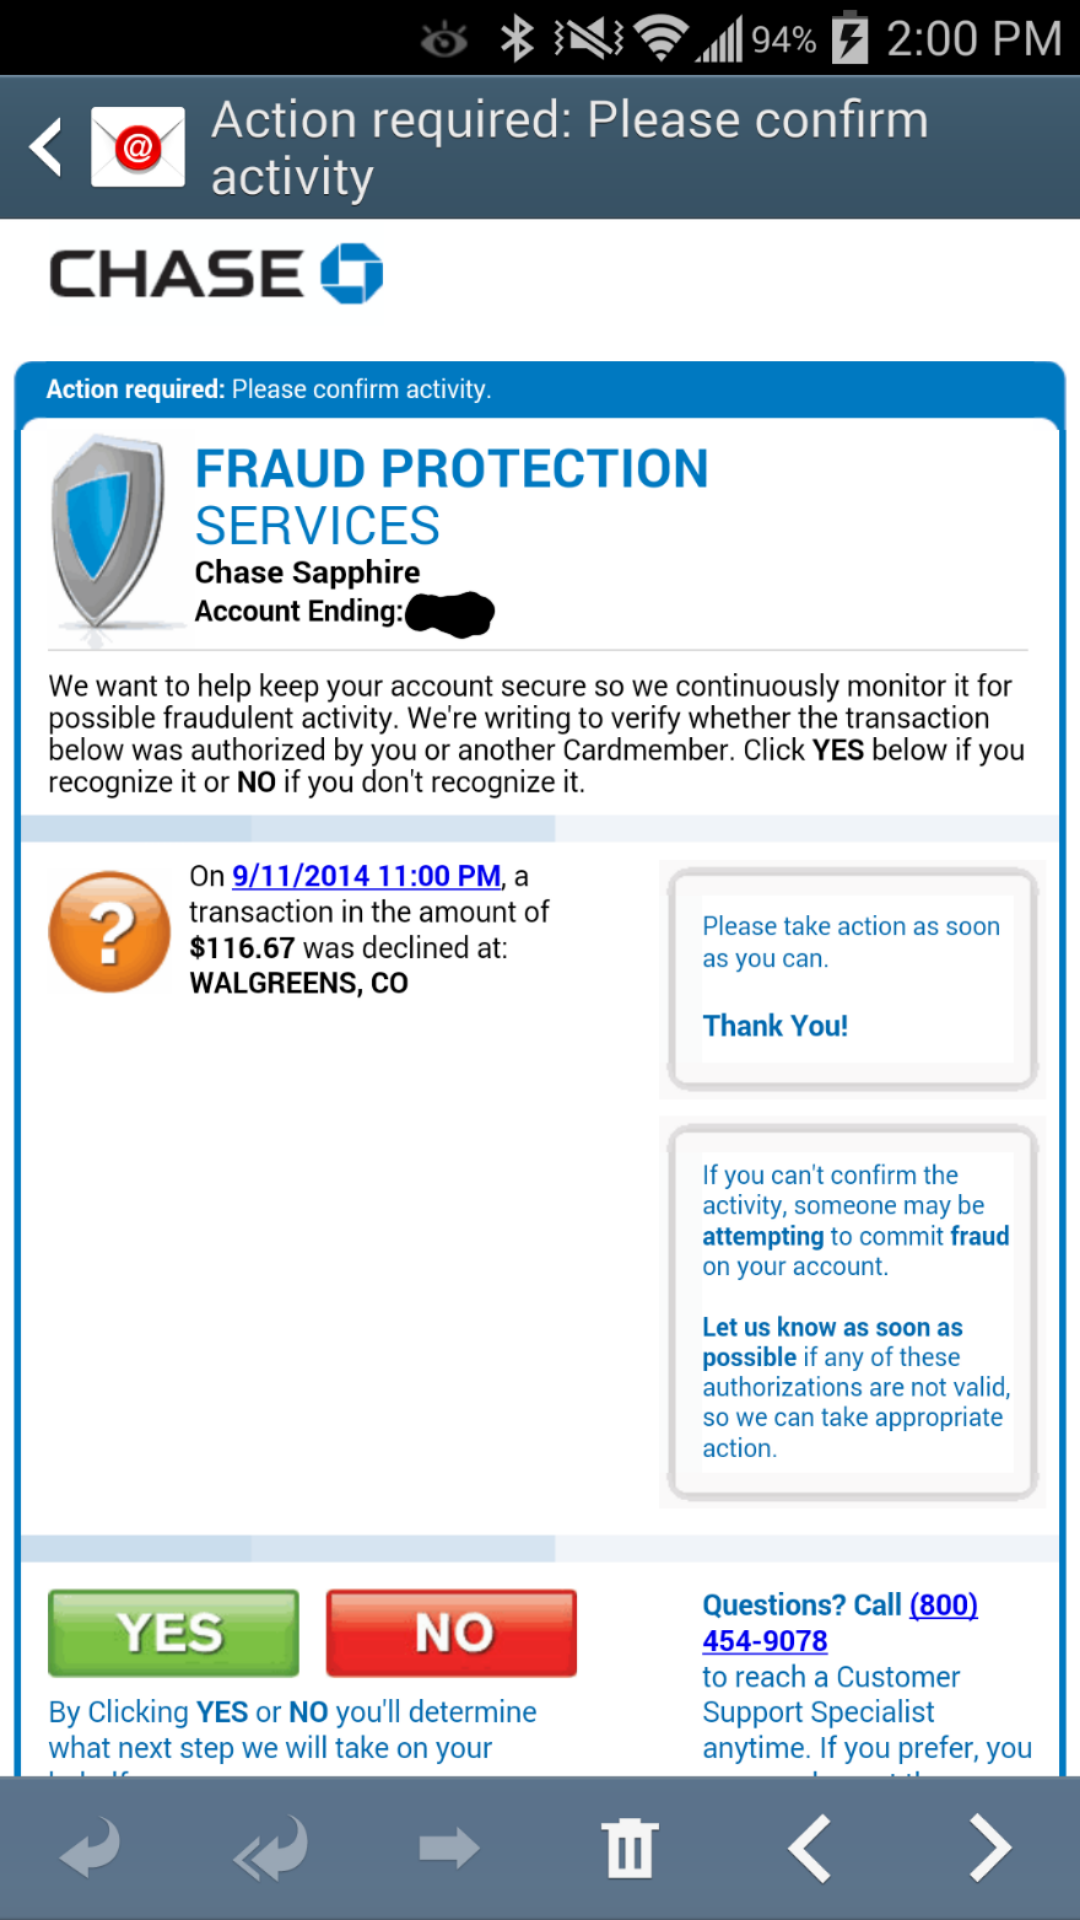 Chase Sapphire Credit Fraud Alert - Page 2 - myFICO® Forums - 3432155